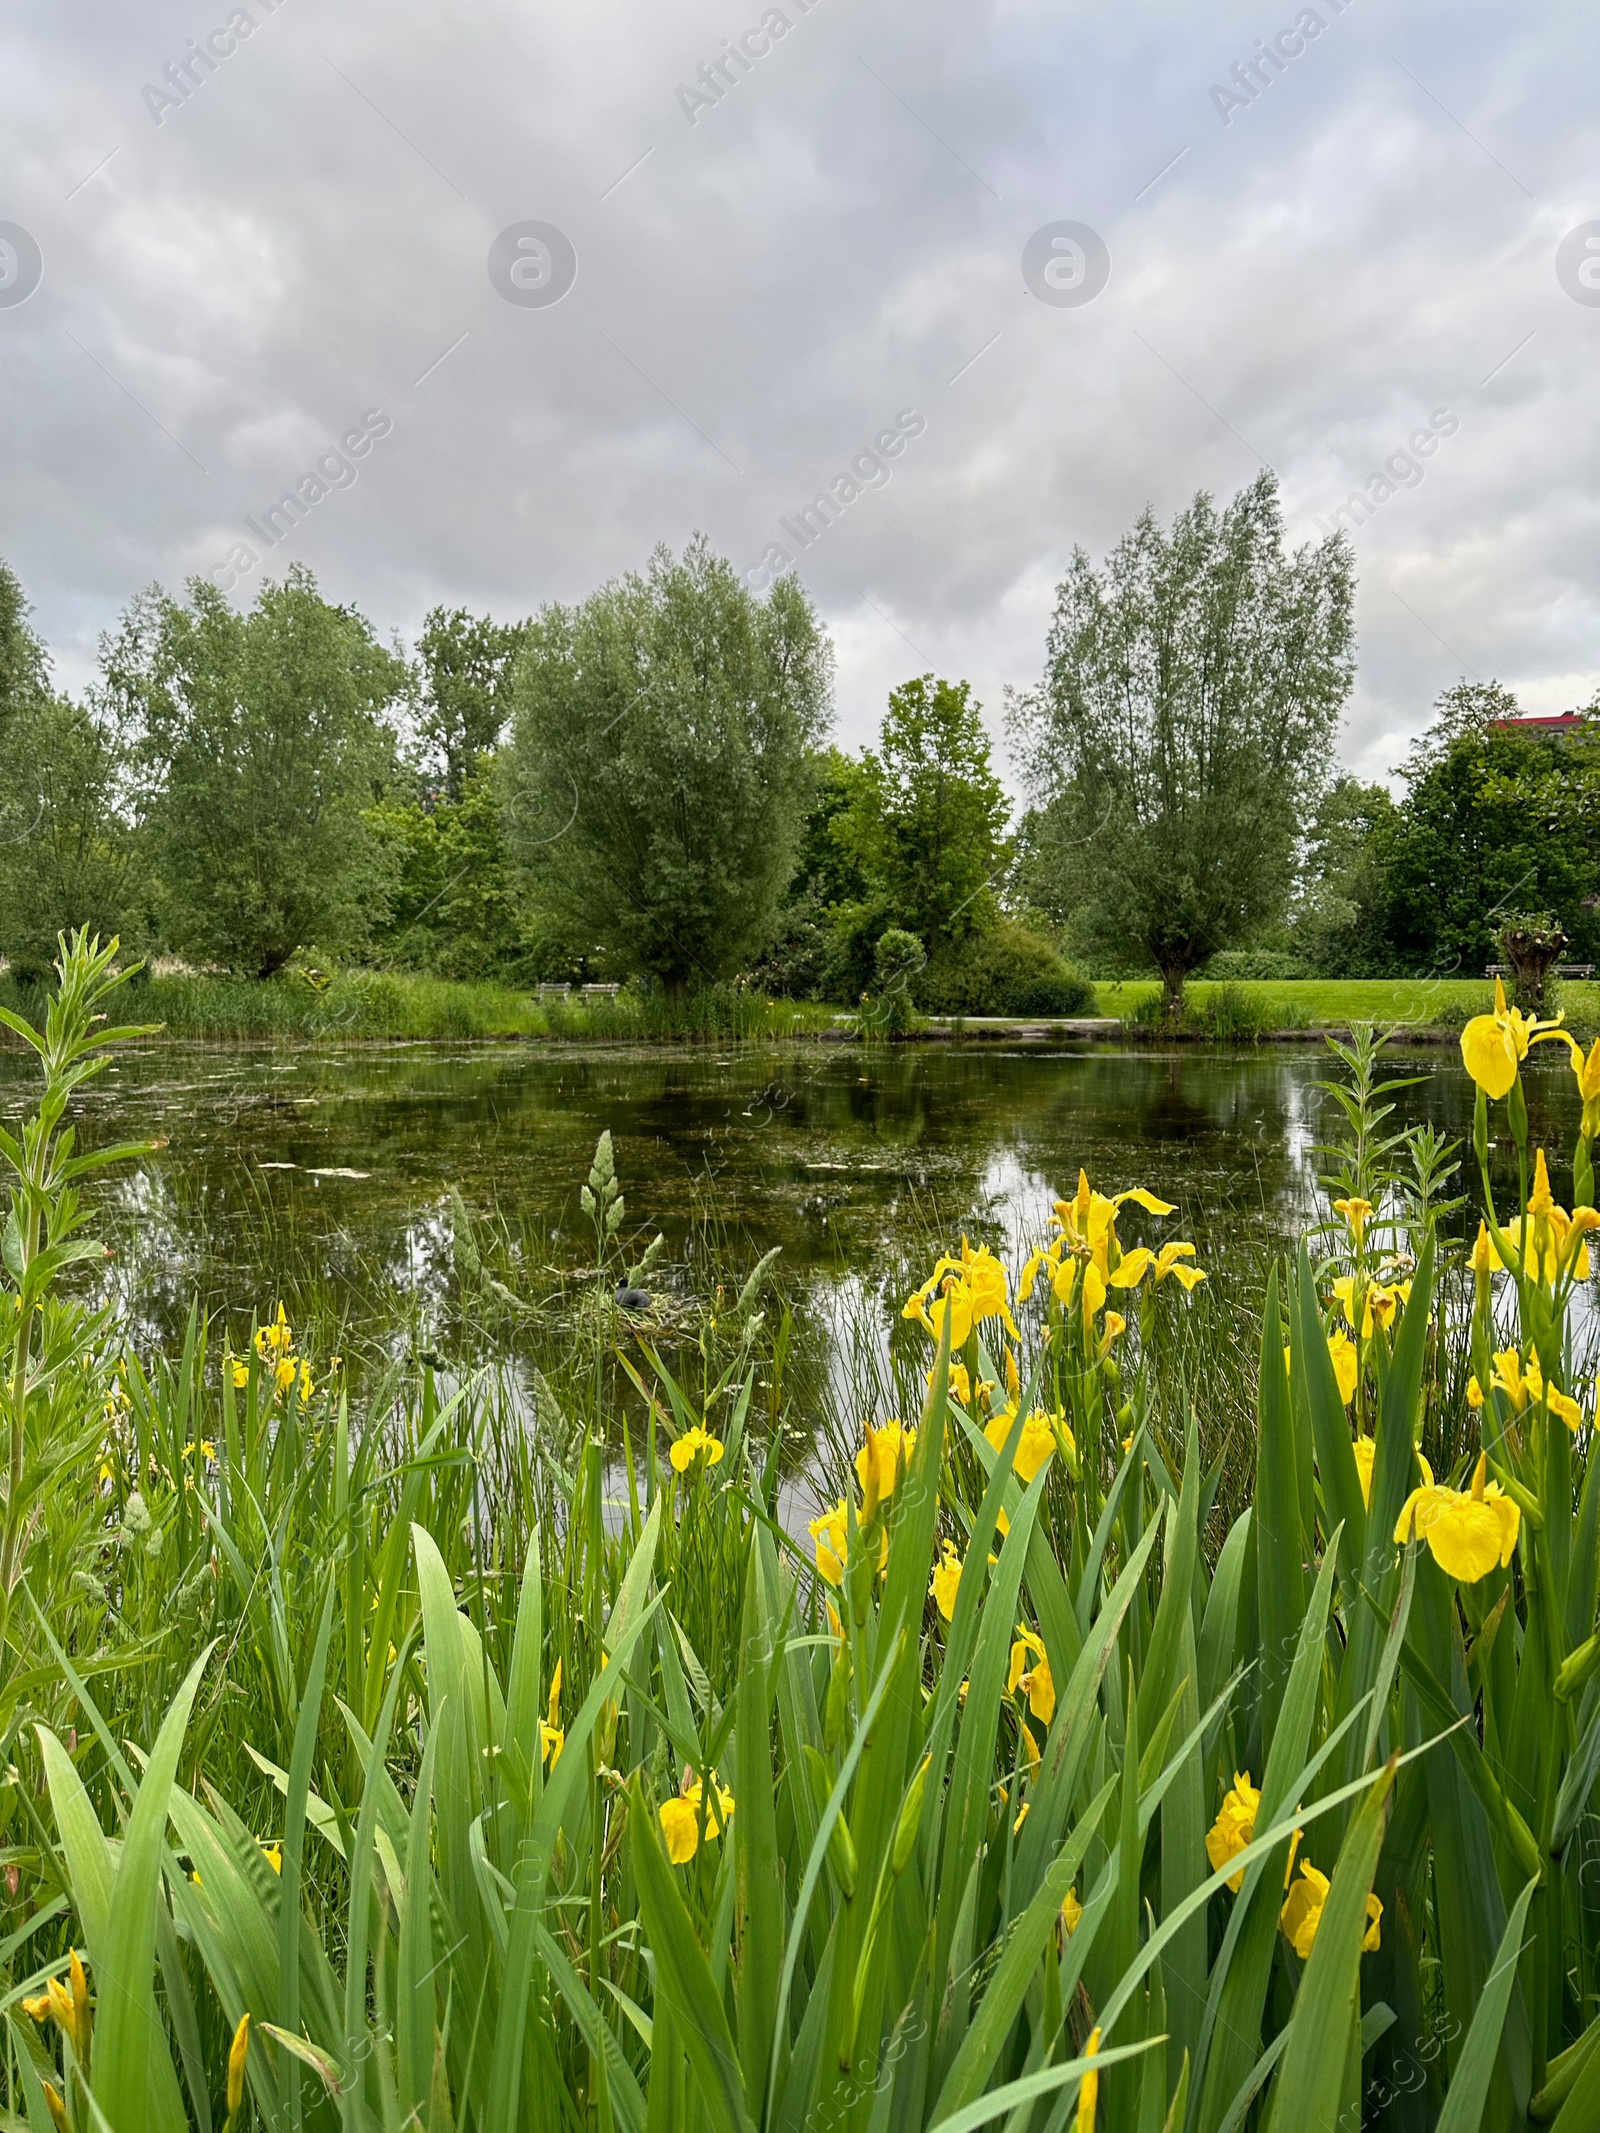 Photo of Picturesque view of trees and yellow iris flowers growing near lake outdoors